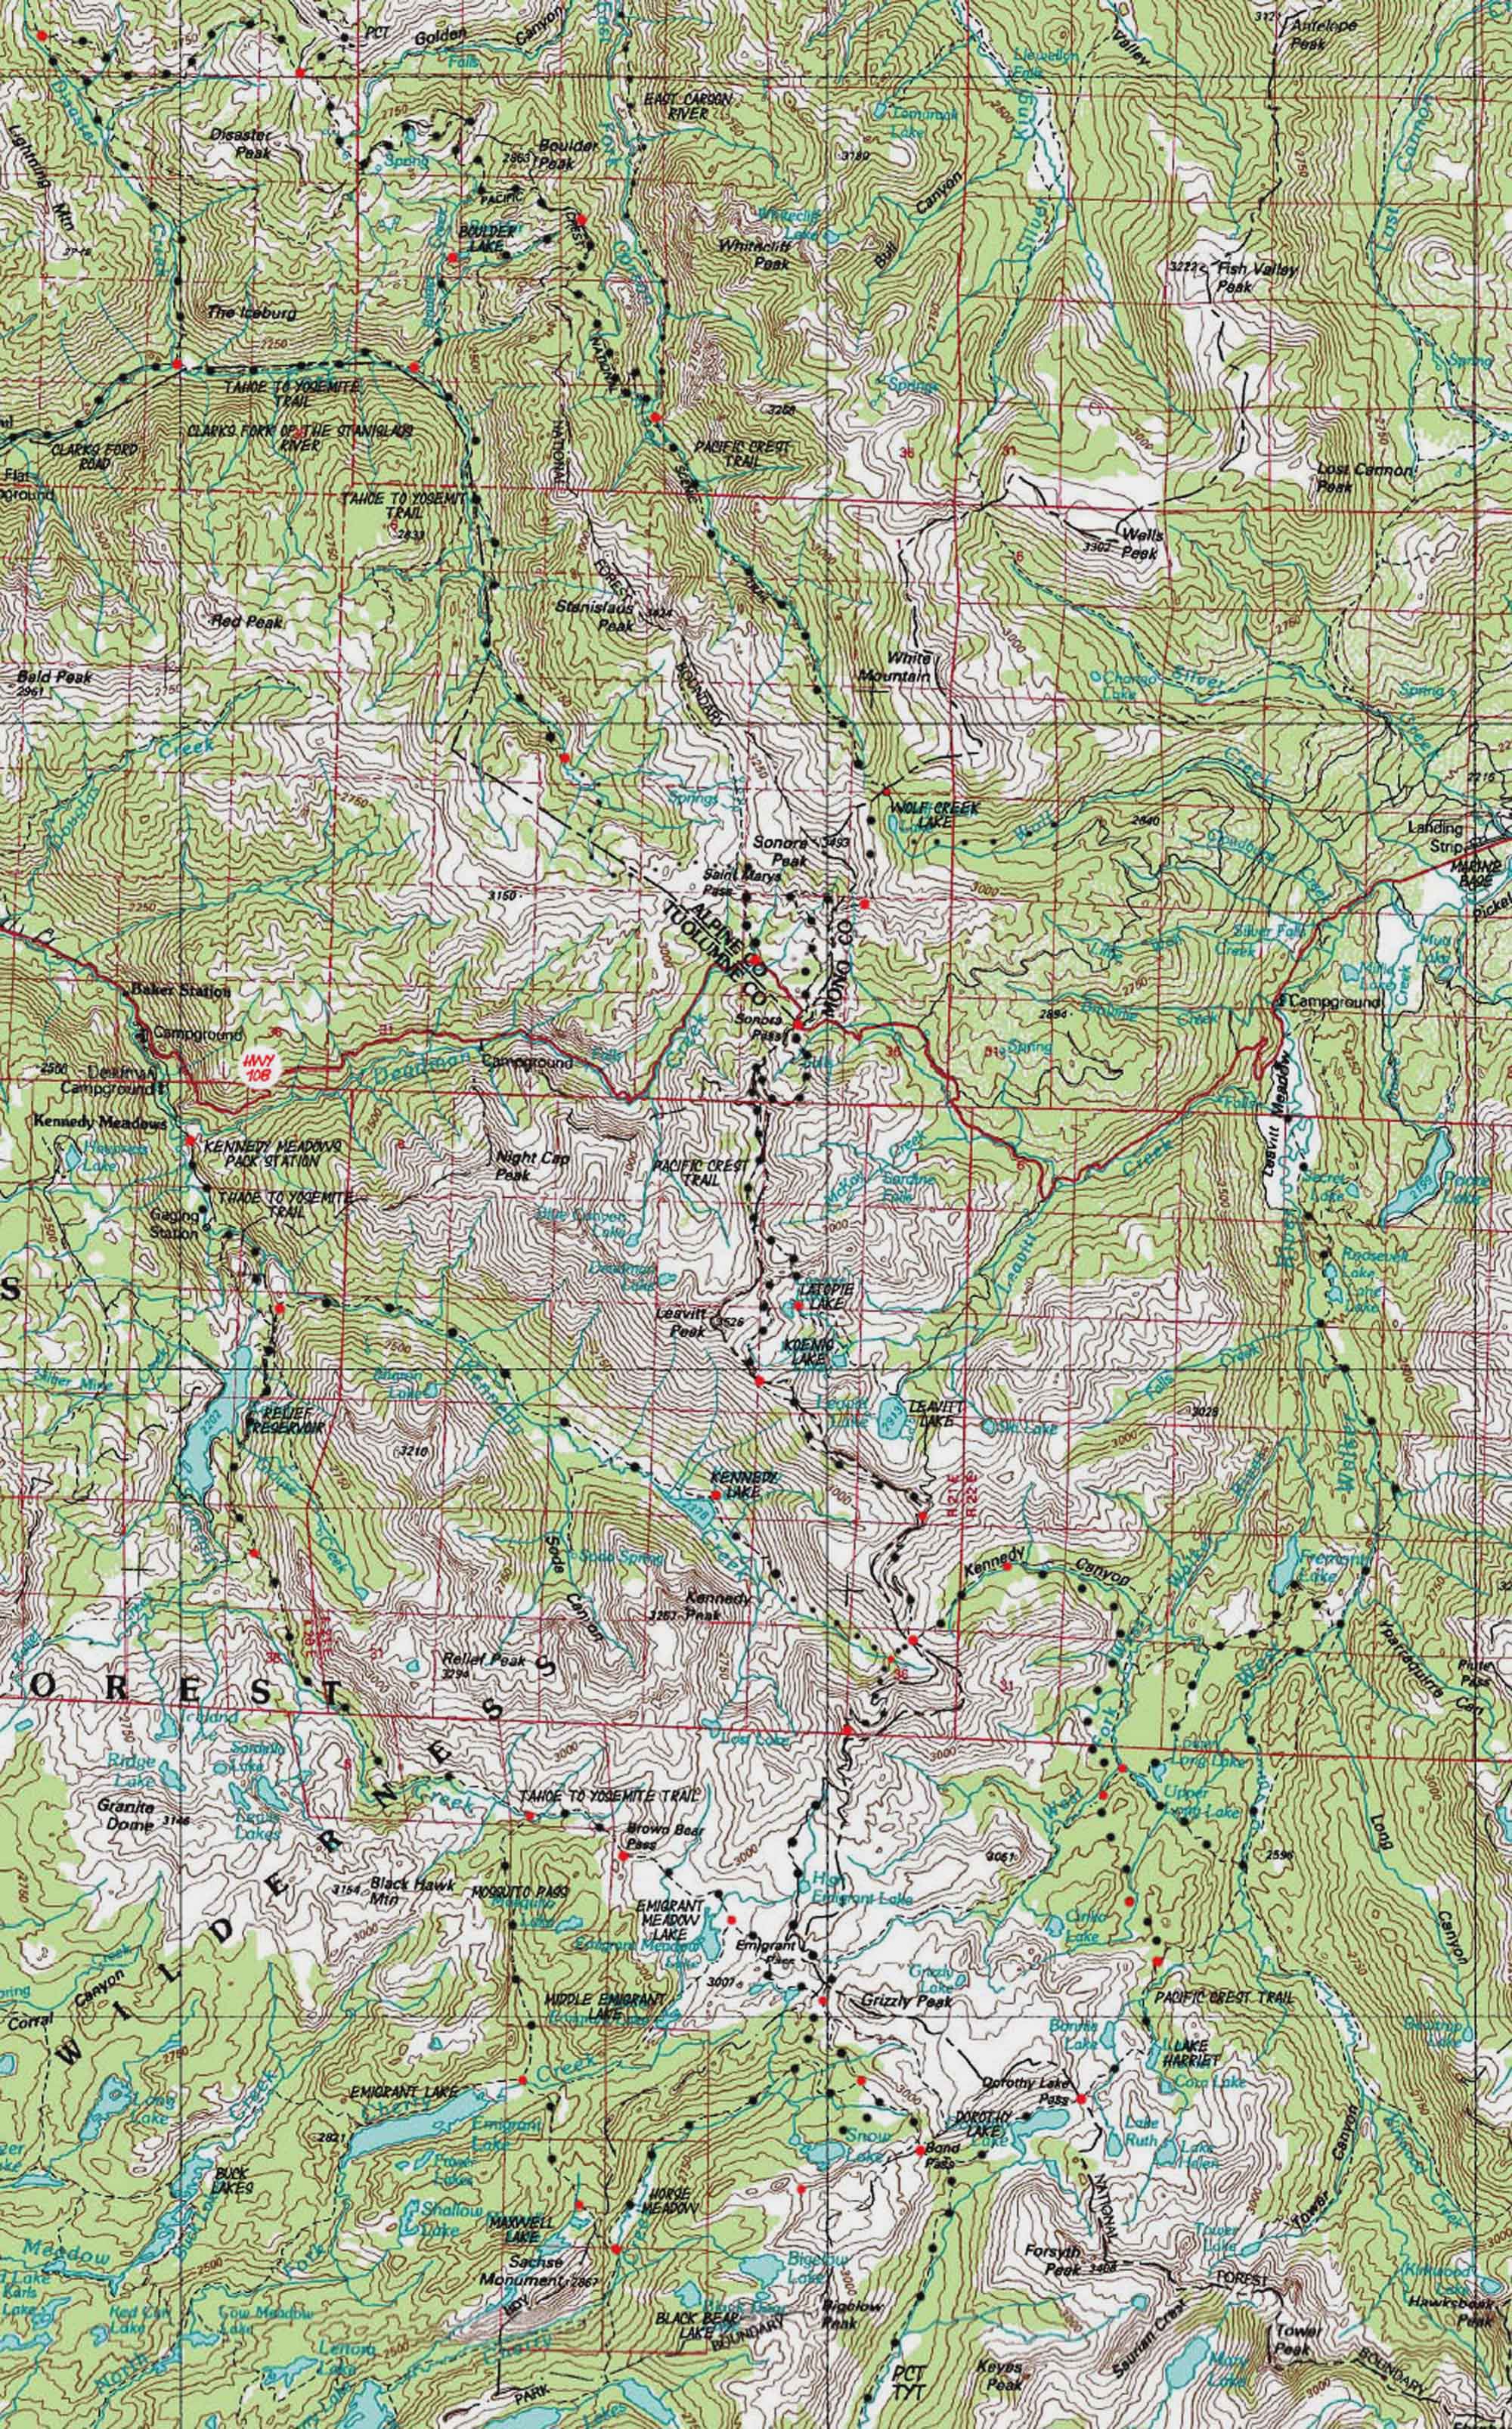 Sonora Pass area hiking map.